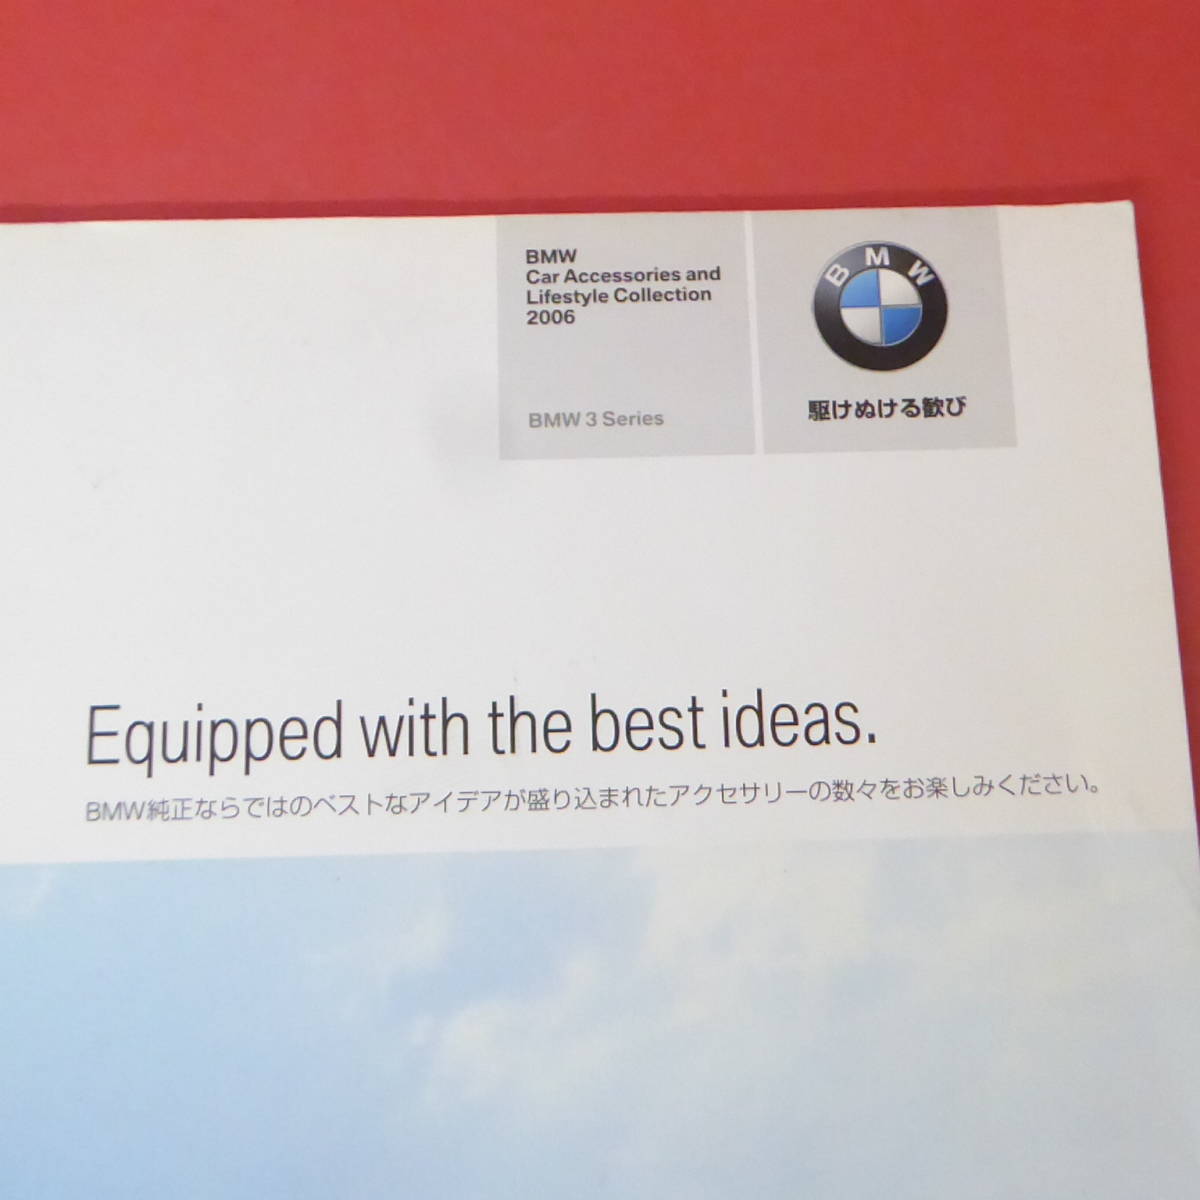 YN2-230315☆BMW　Car Accessories and Lifestyle Collection カタログ　2006年_画像2